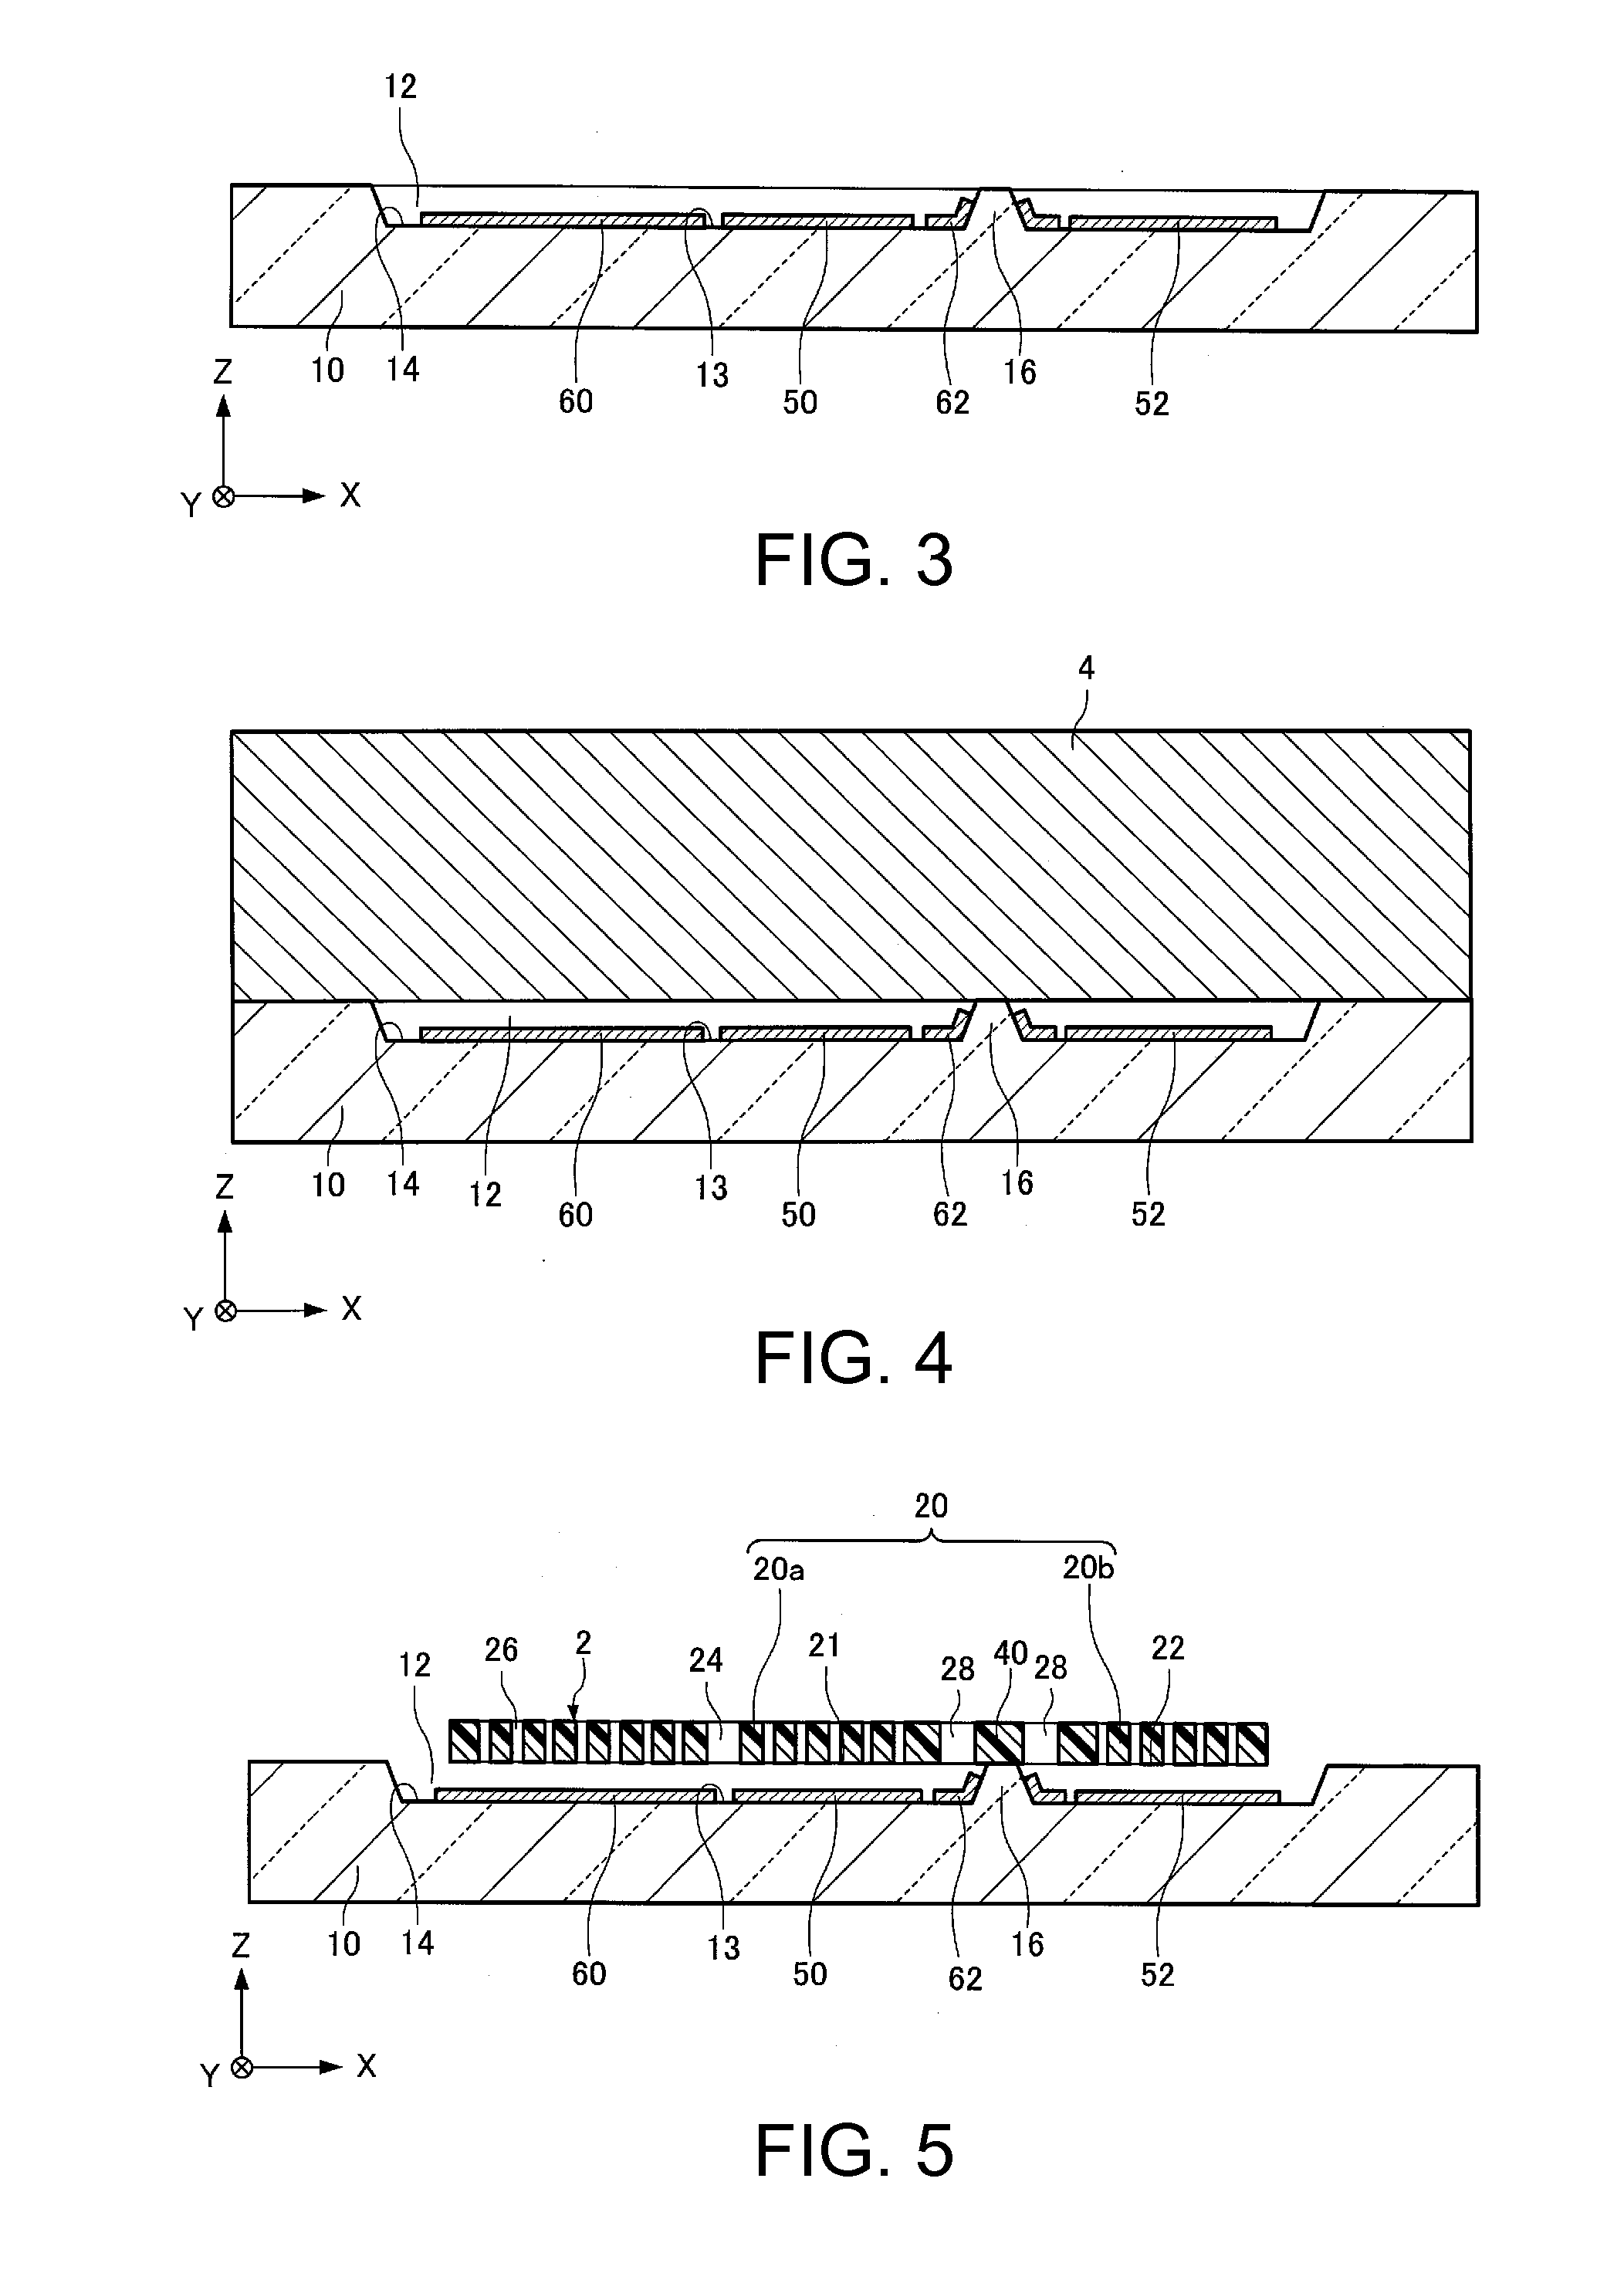 Functional element, electronic apparatus, and moving object